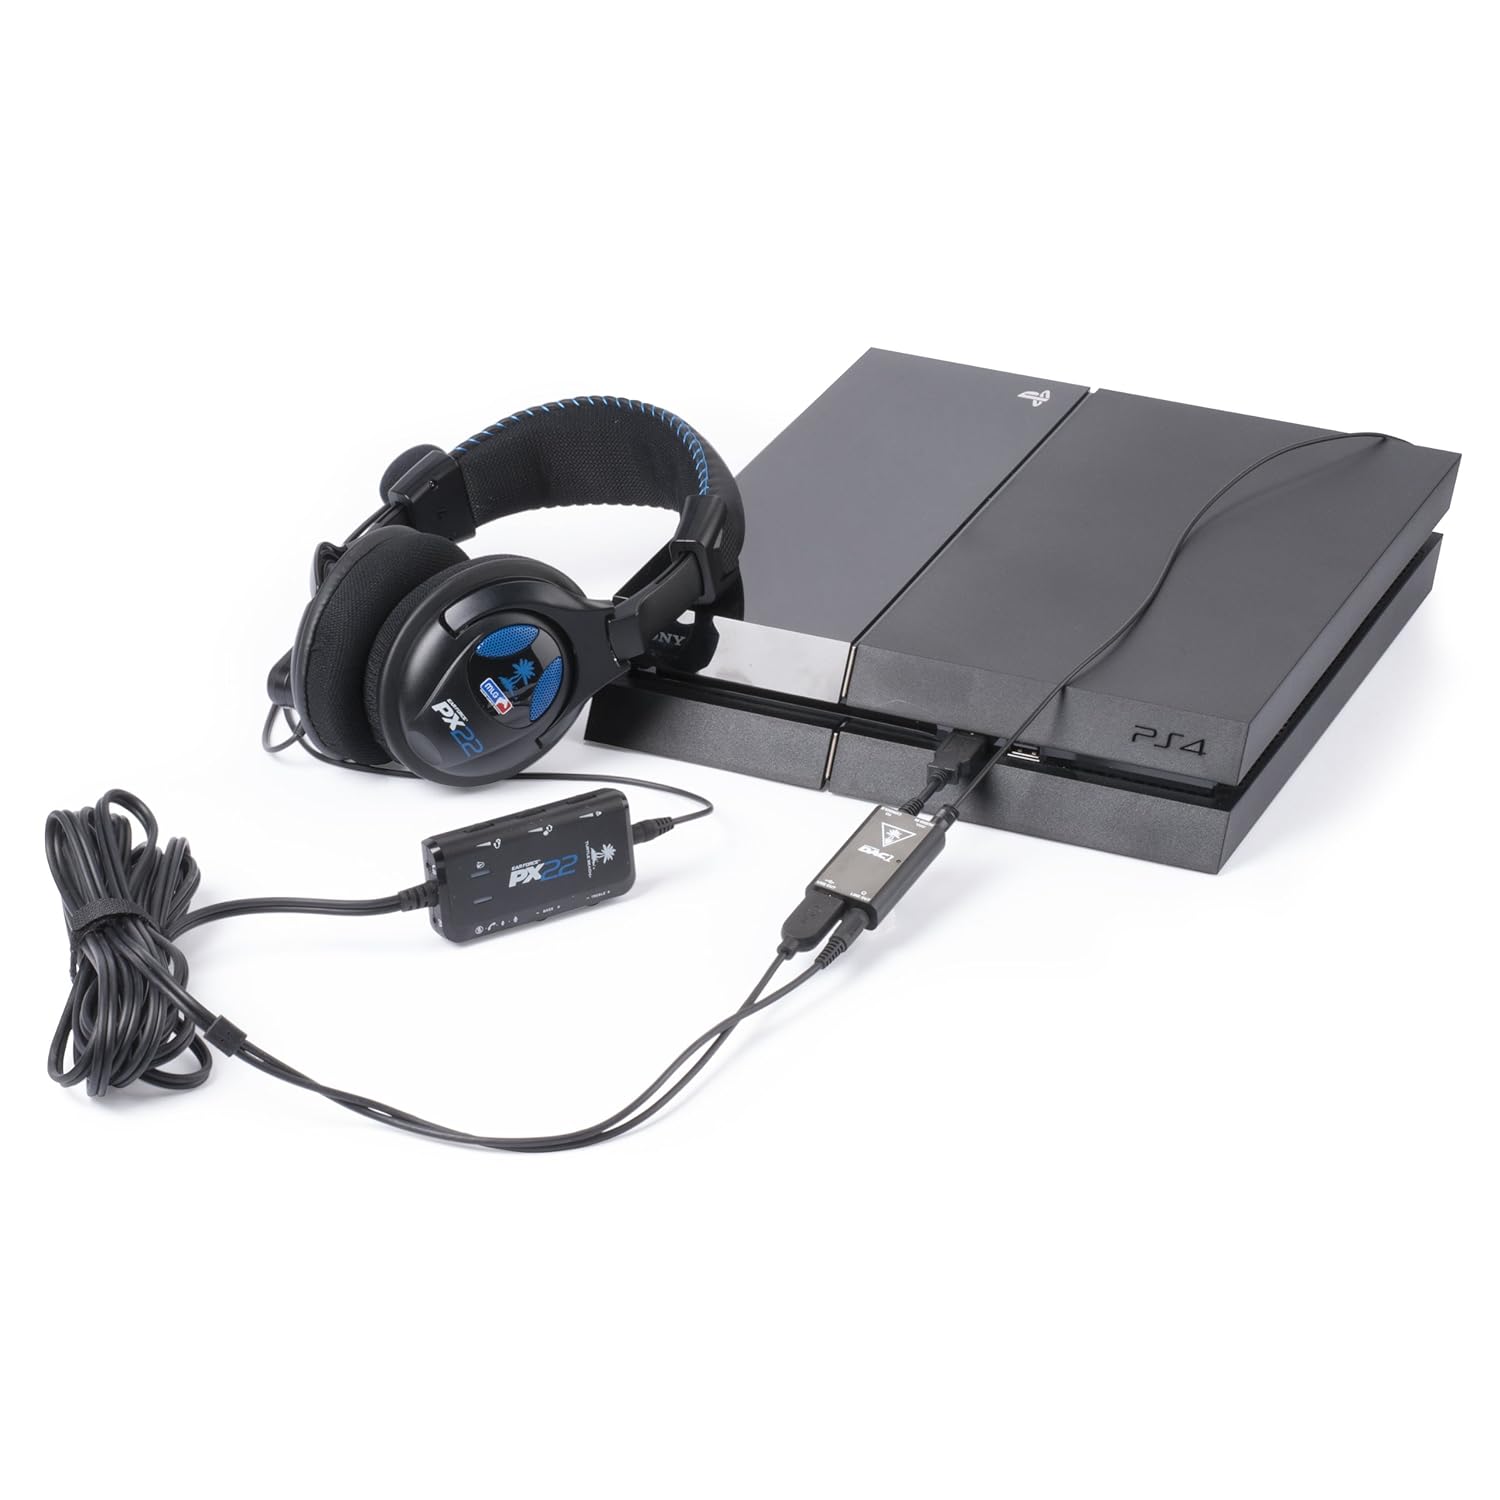 Turtle Beach PS4 Ear Force Upgrade Kit for Turtle Beach Headset Compatibility (TBS-0115-01)